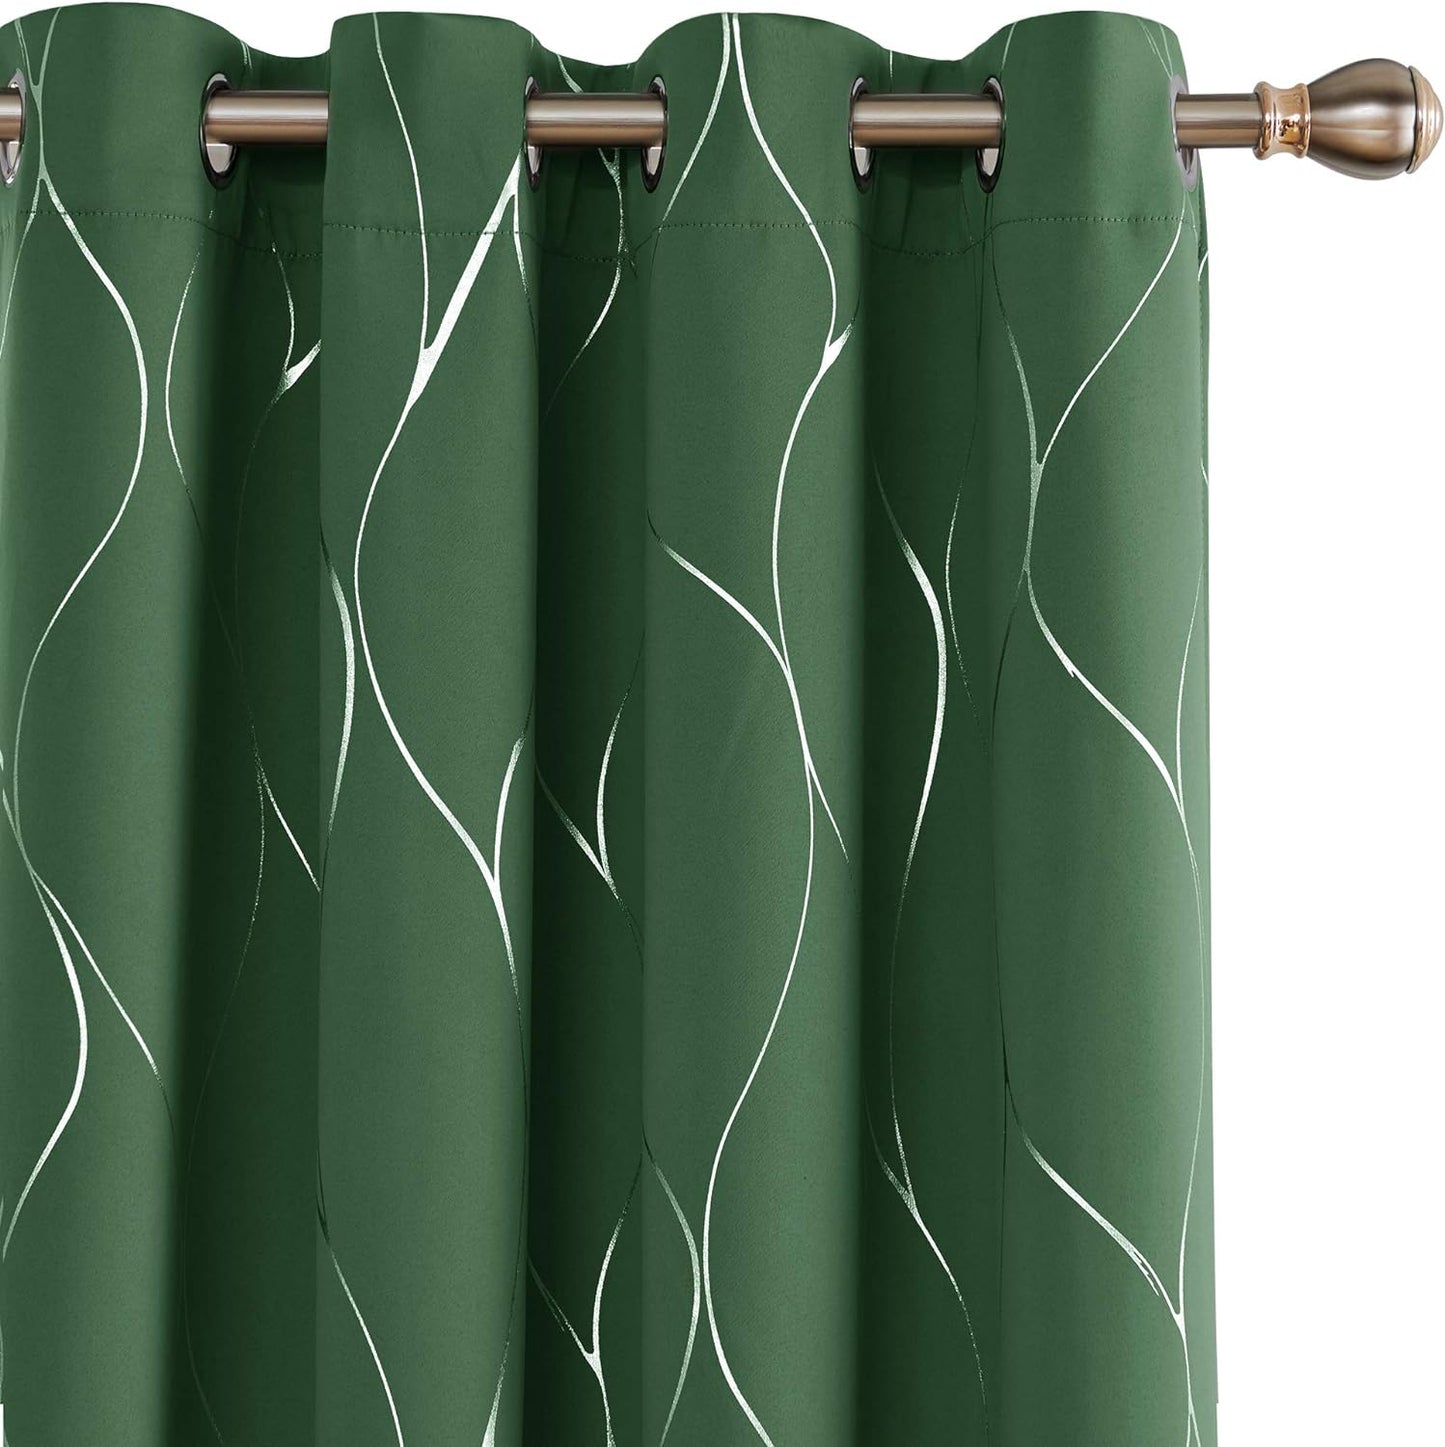 Deconovo Blackout Curtains with Foil Wave Pattern, Grommet Curtain Room Darkening Window Panels, Thermal Insulated Curtain Drapes for Nursery Room (42W X 54L Inch, 2 Panels, Turquoise)  DECONOVO Dark Forest W52 X L84 